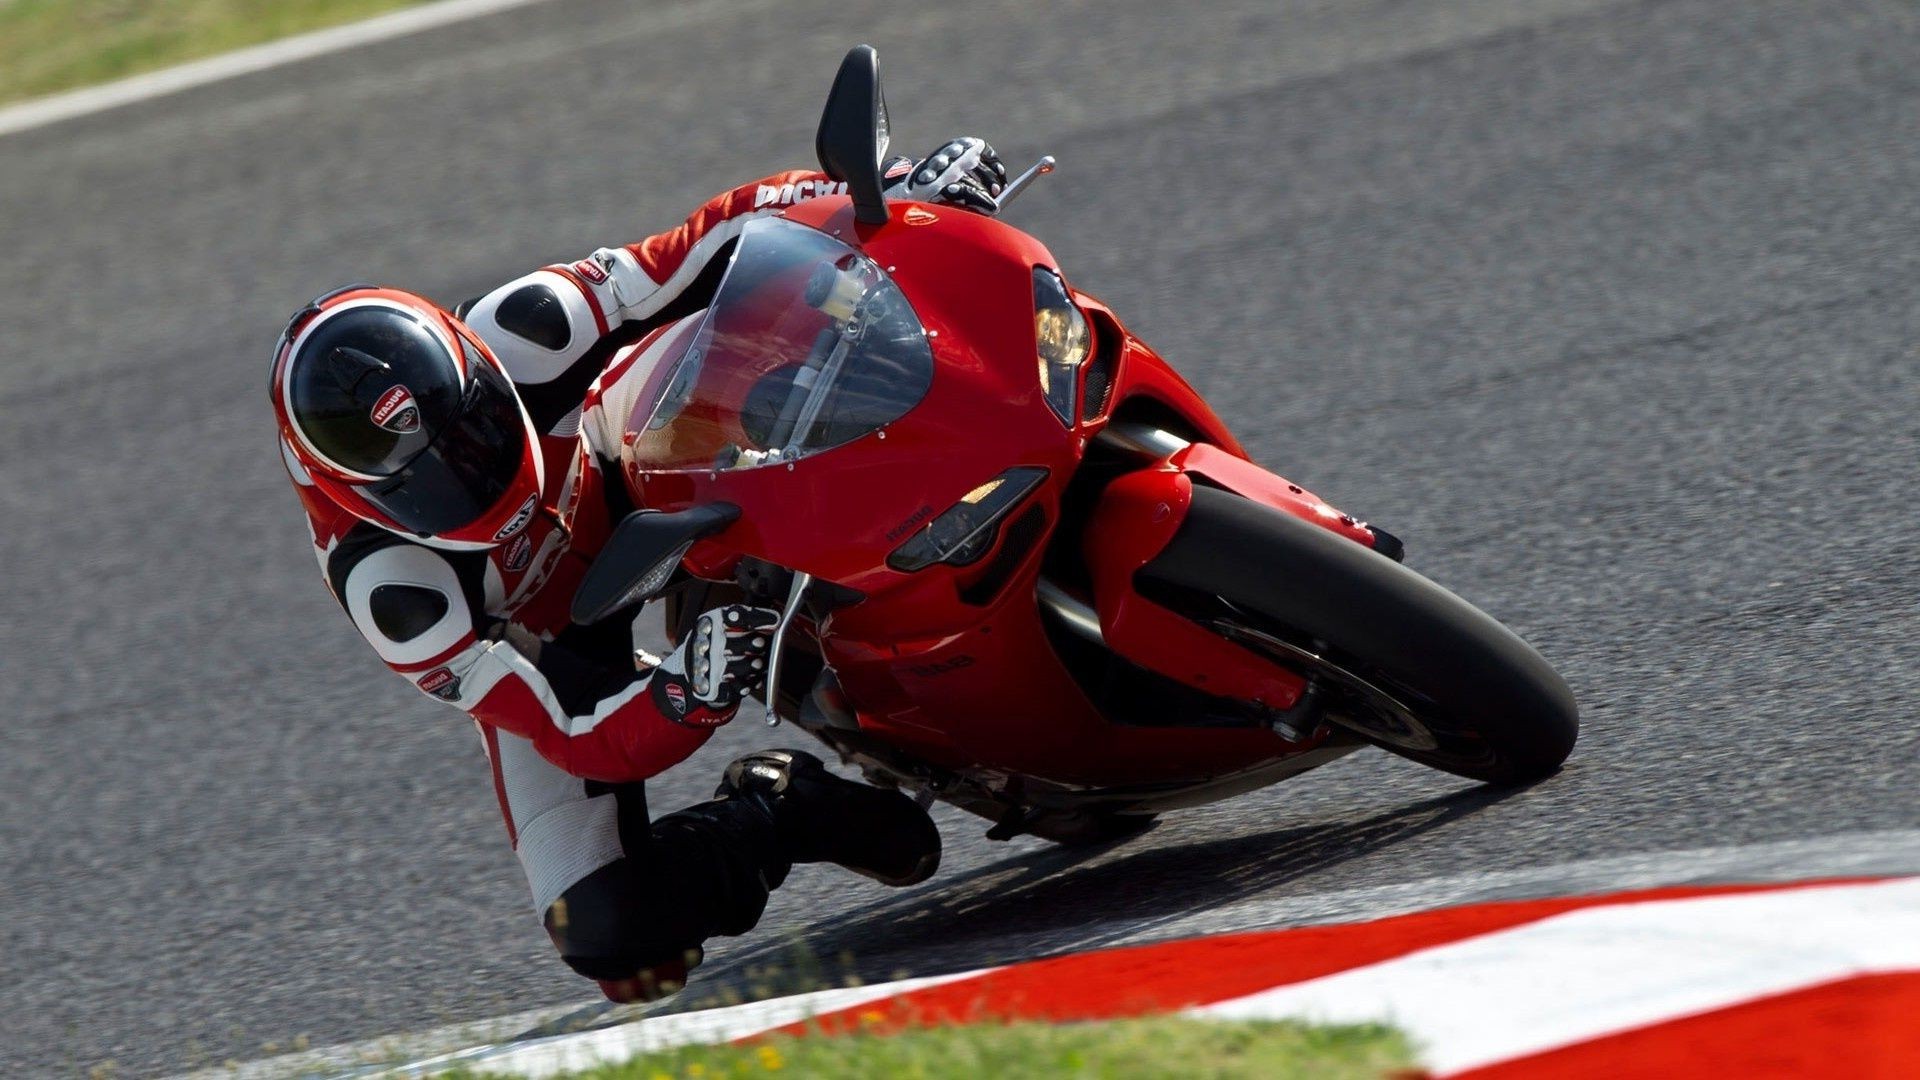 sport bike race bike competition hurry championship track fast drive vehicle sport racer machine power tire action transportation system